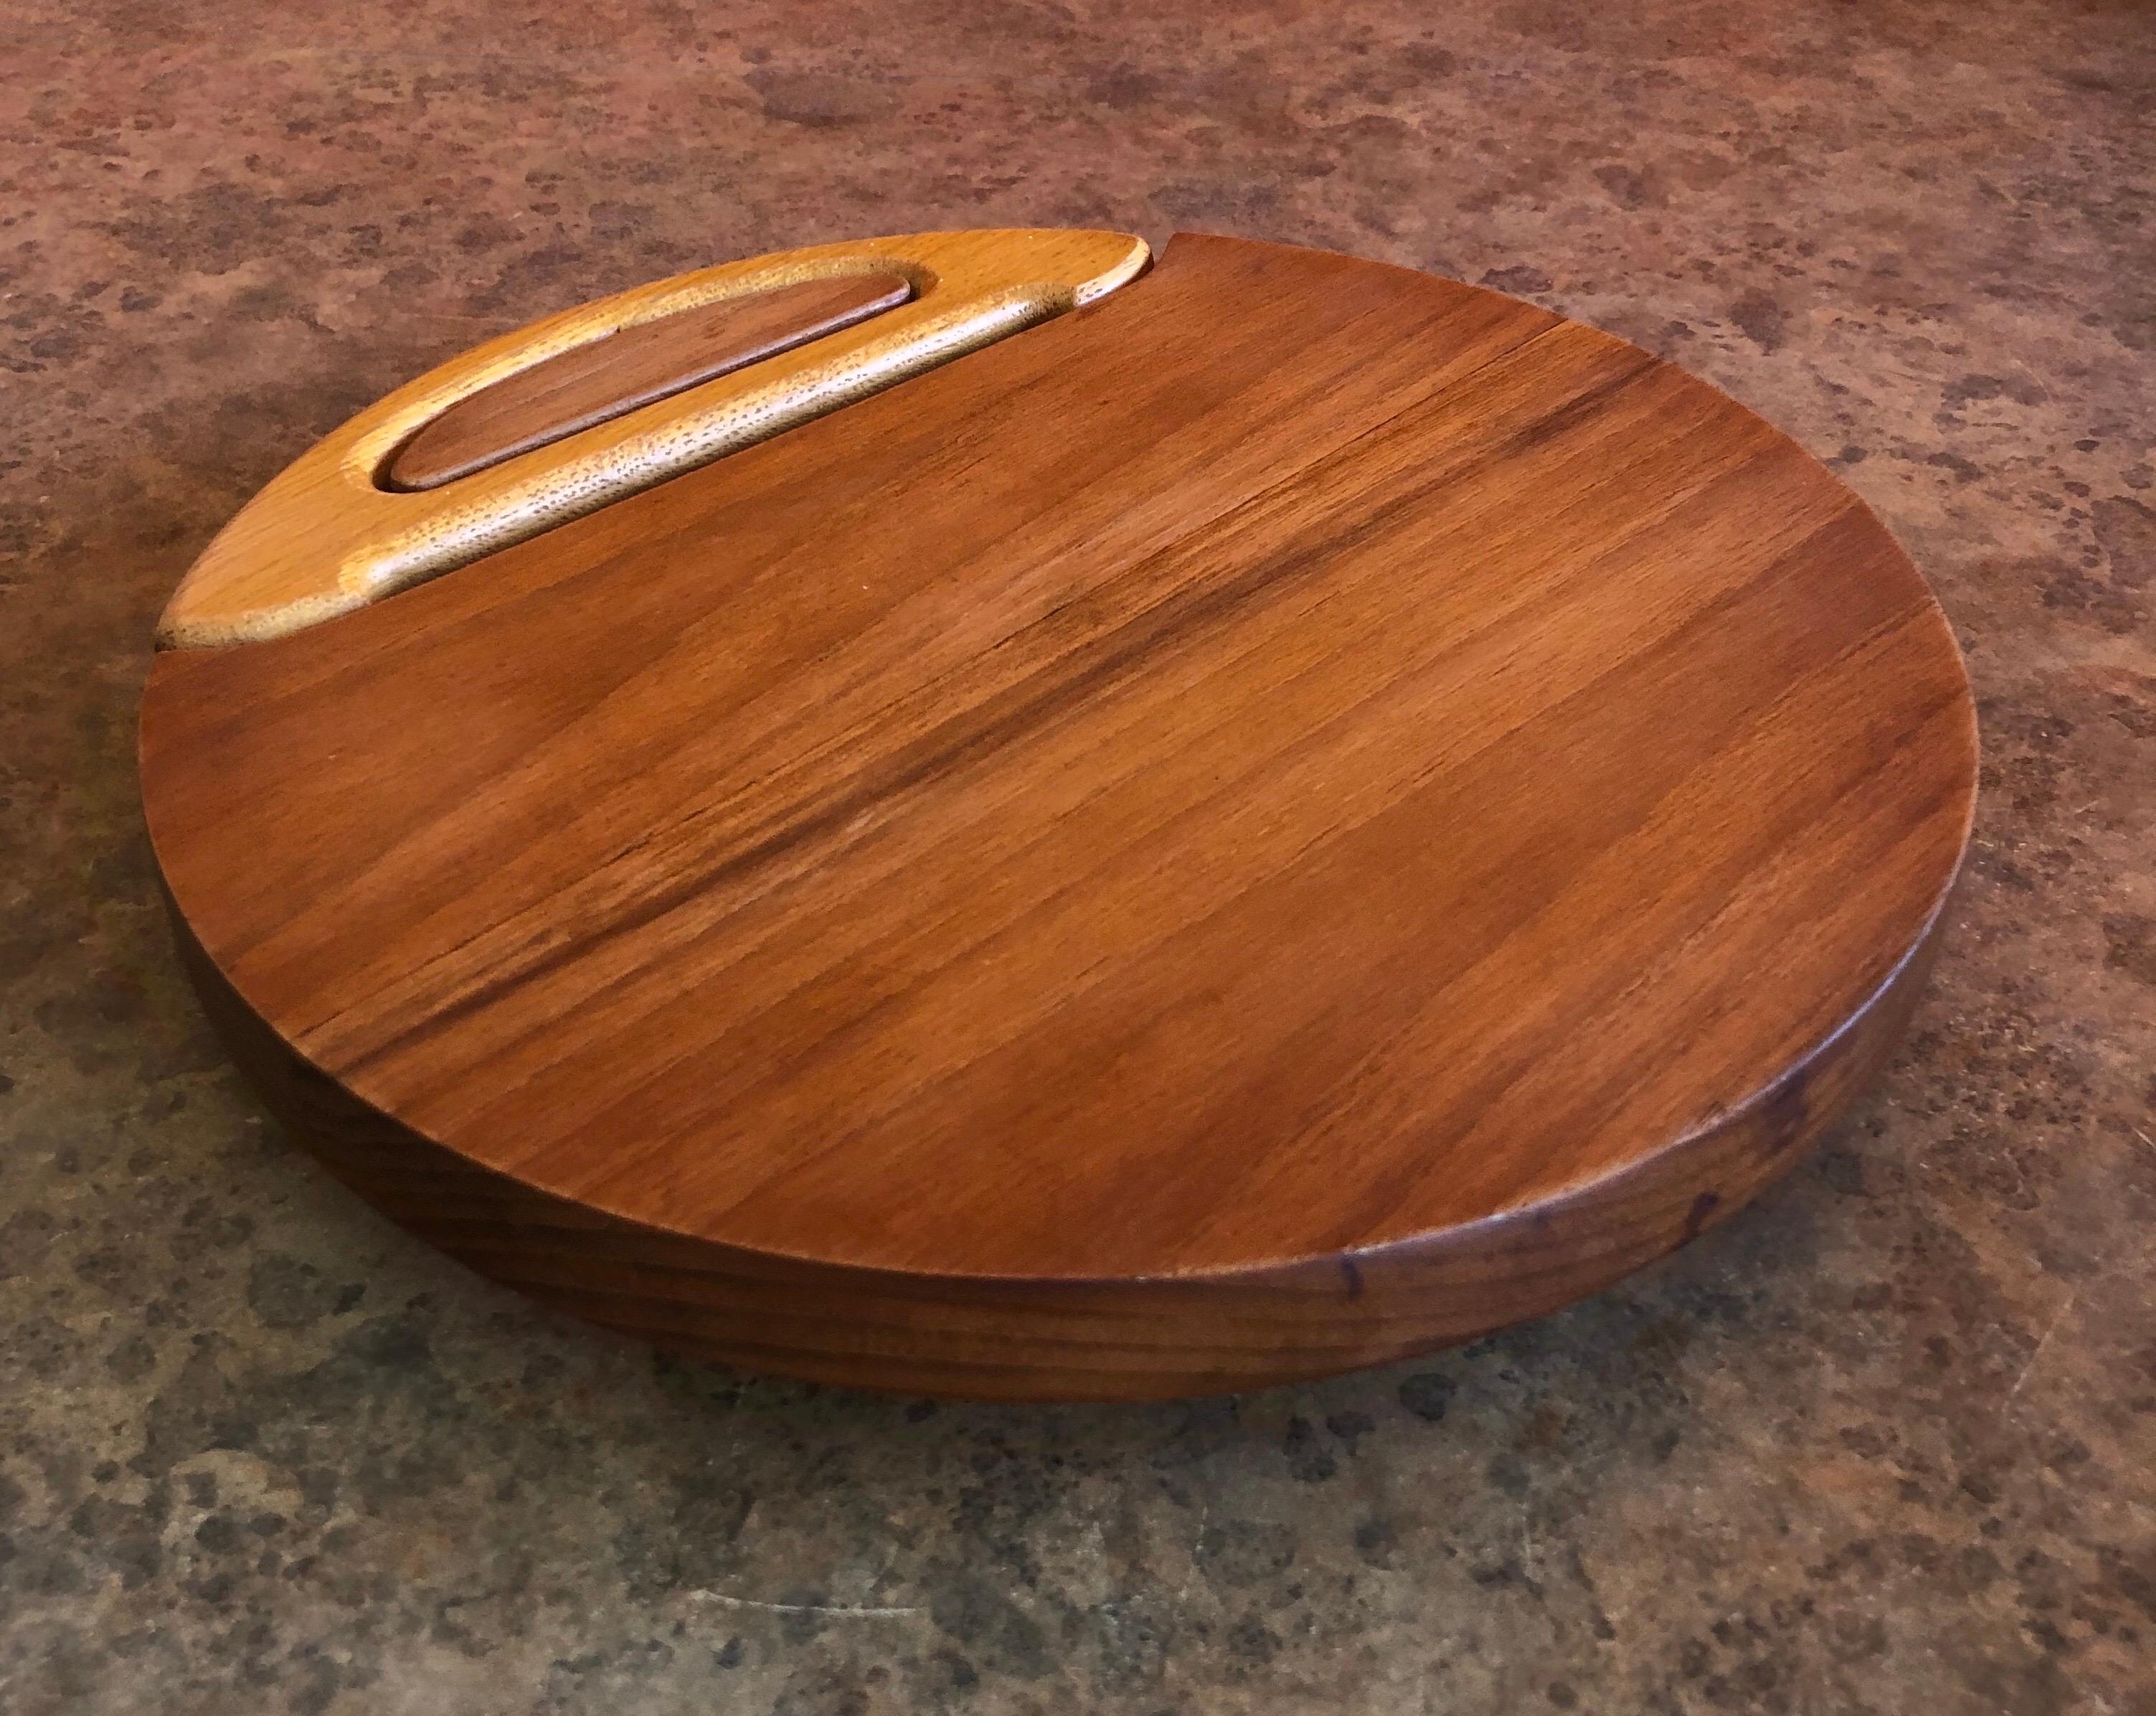 A pristine staved teak round cheese board with cutter by Jens Quistgaard for Dansk, circa 1950s. The board is 9.75